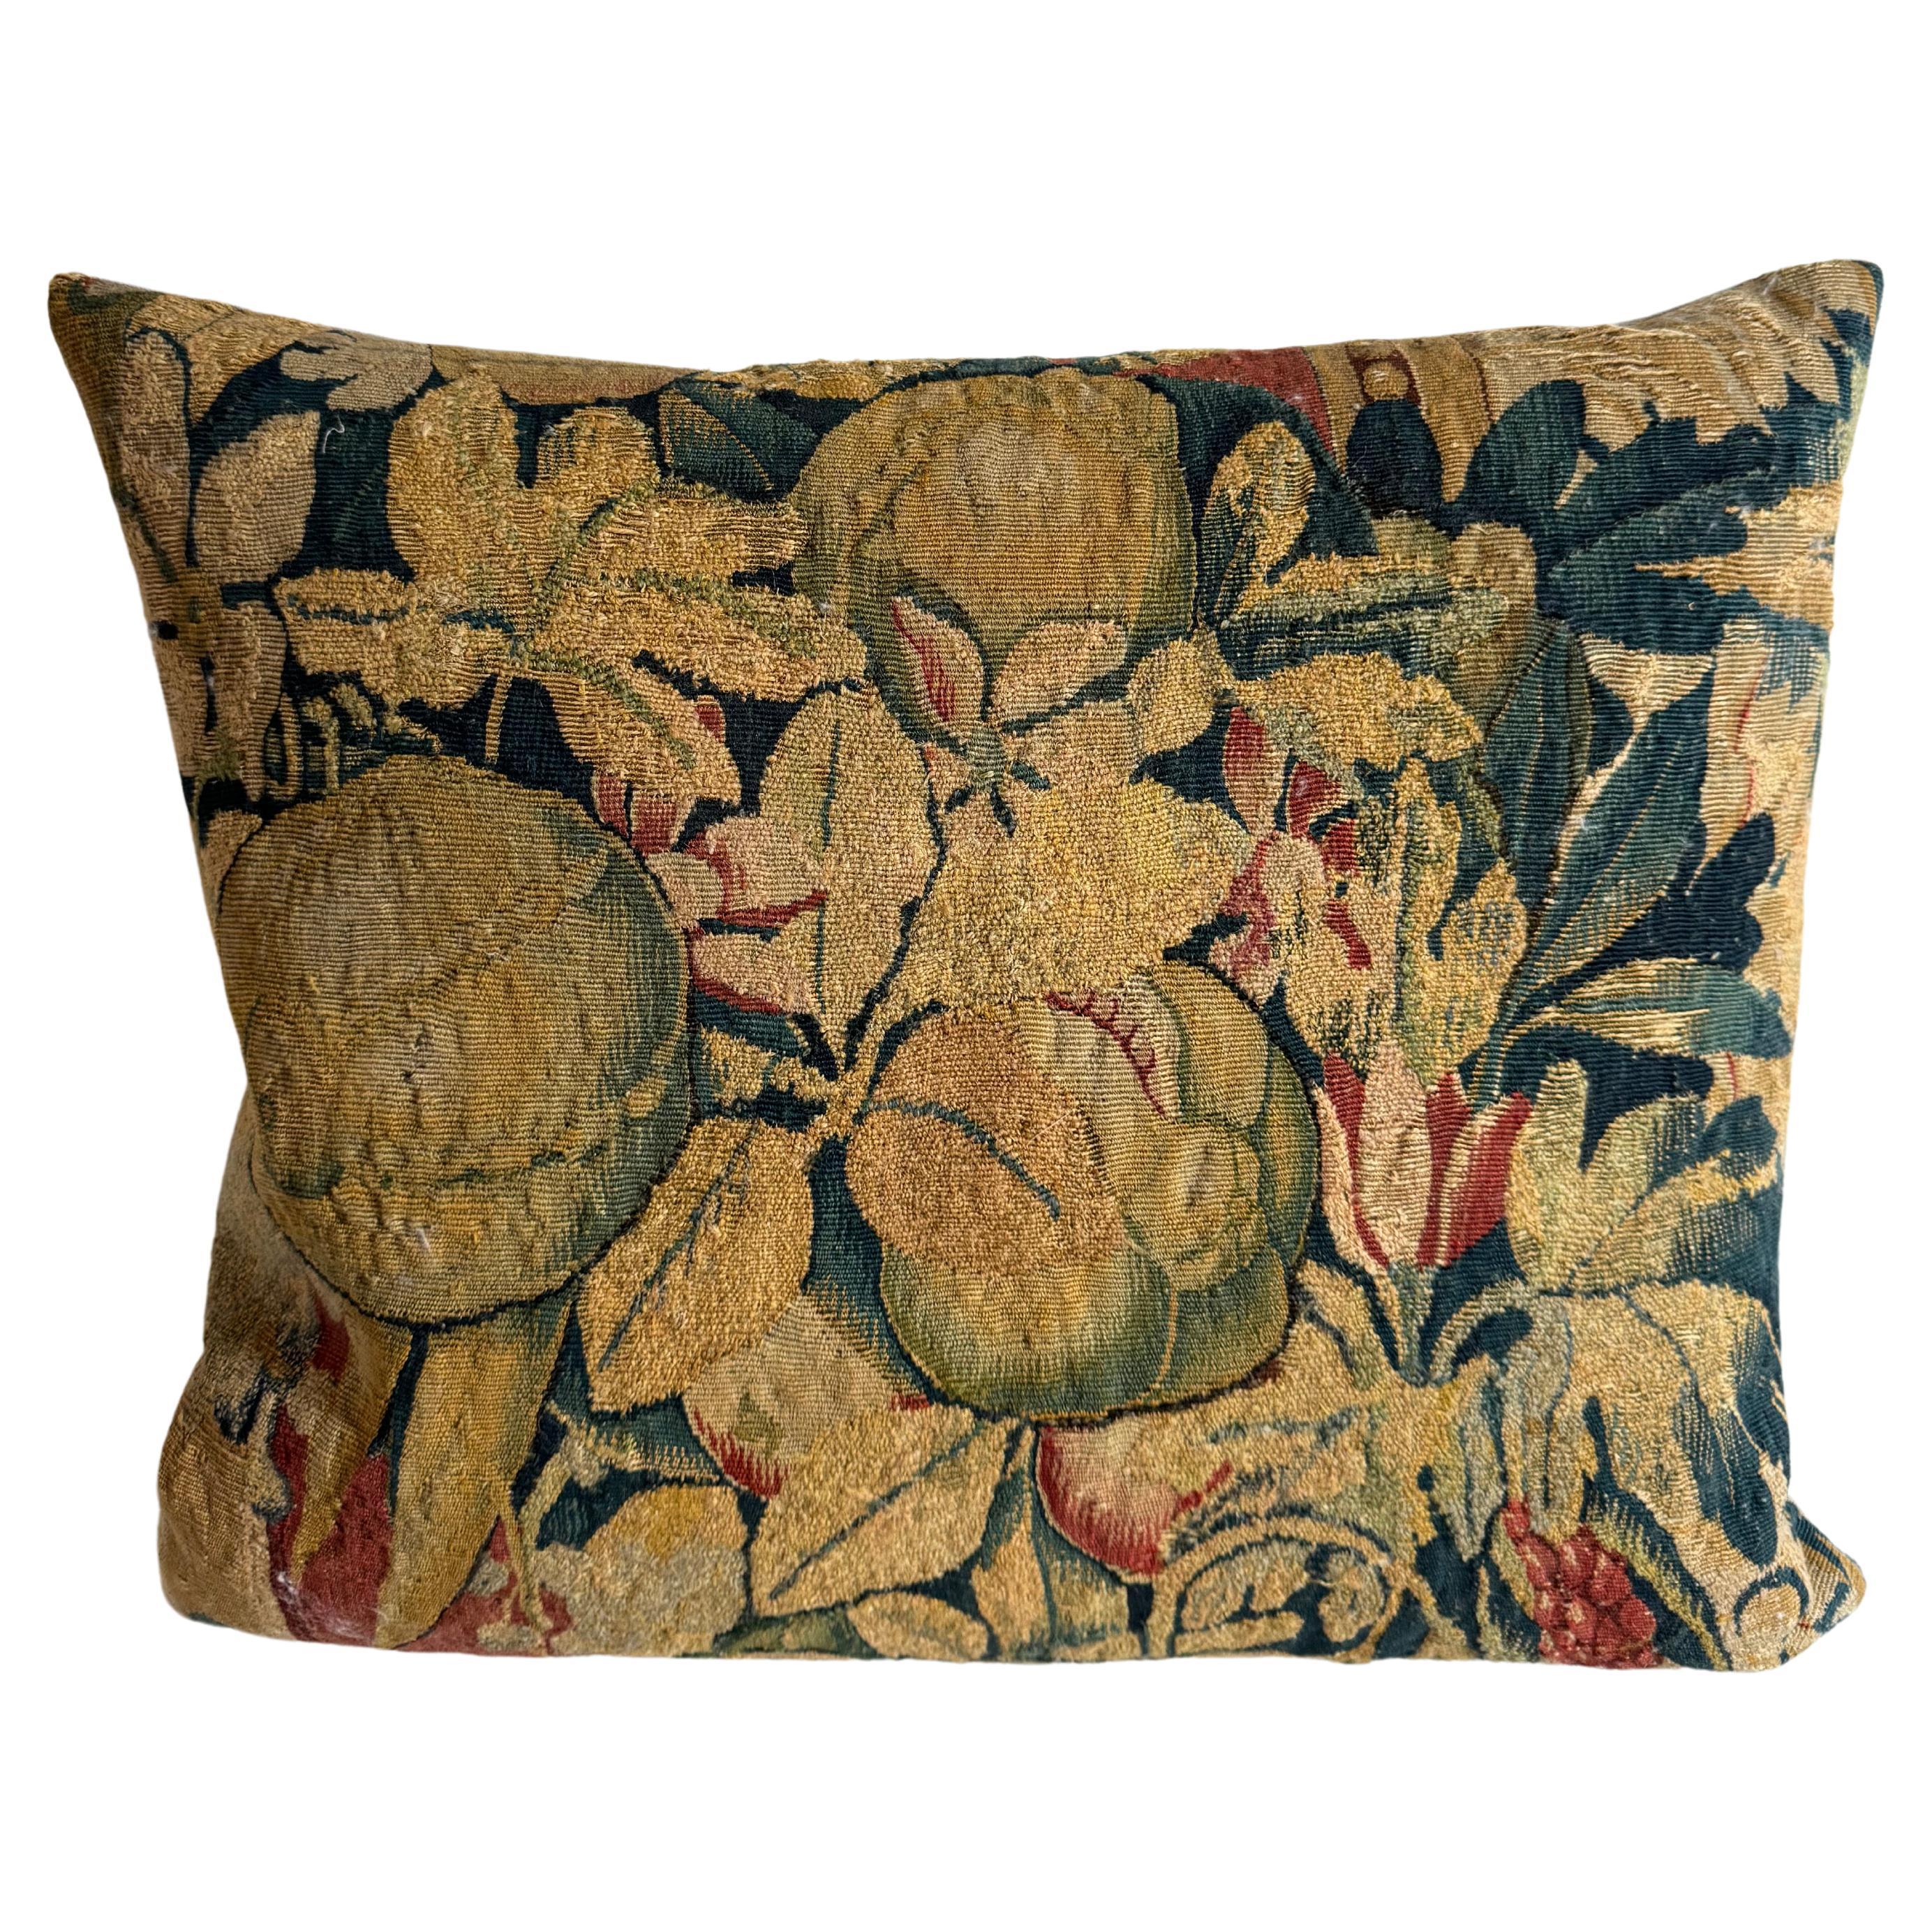 Brussels 16th Century Pillow - 21" x 18" For Sale